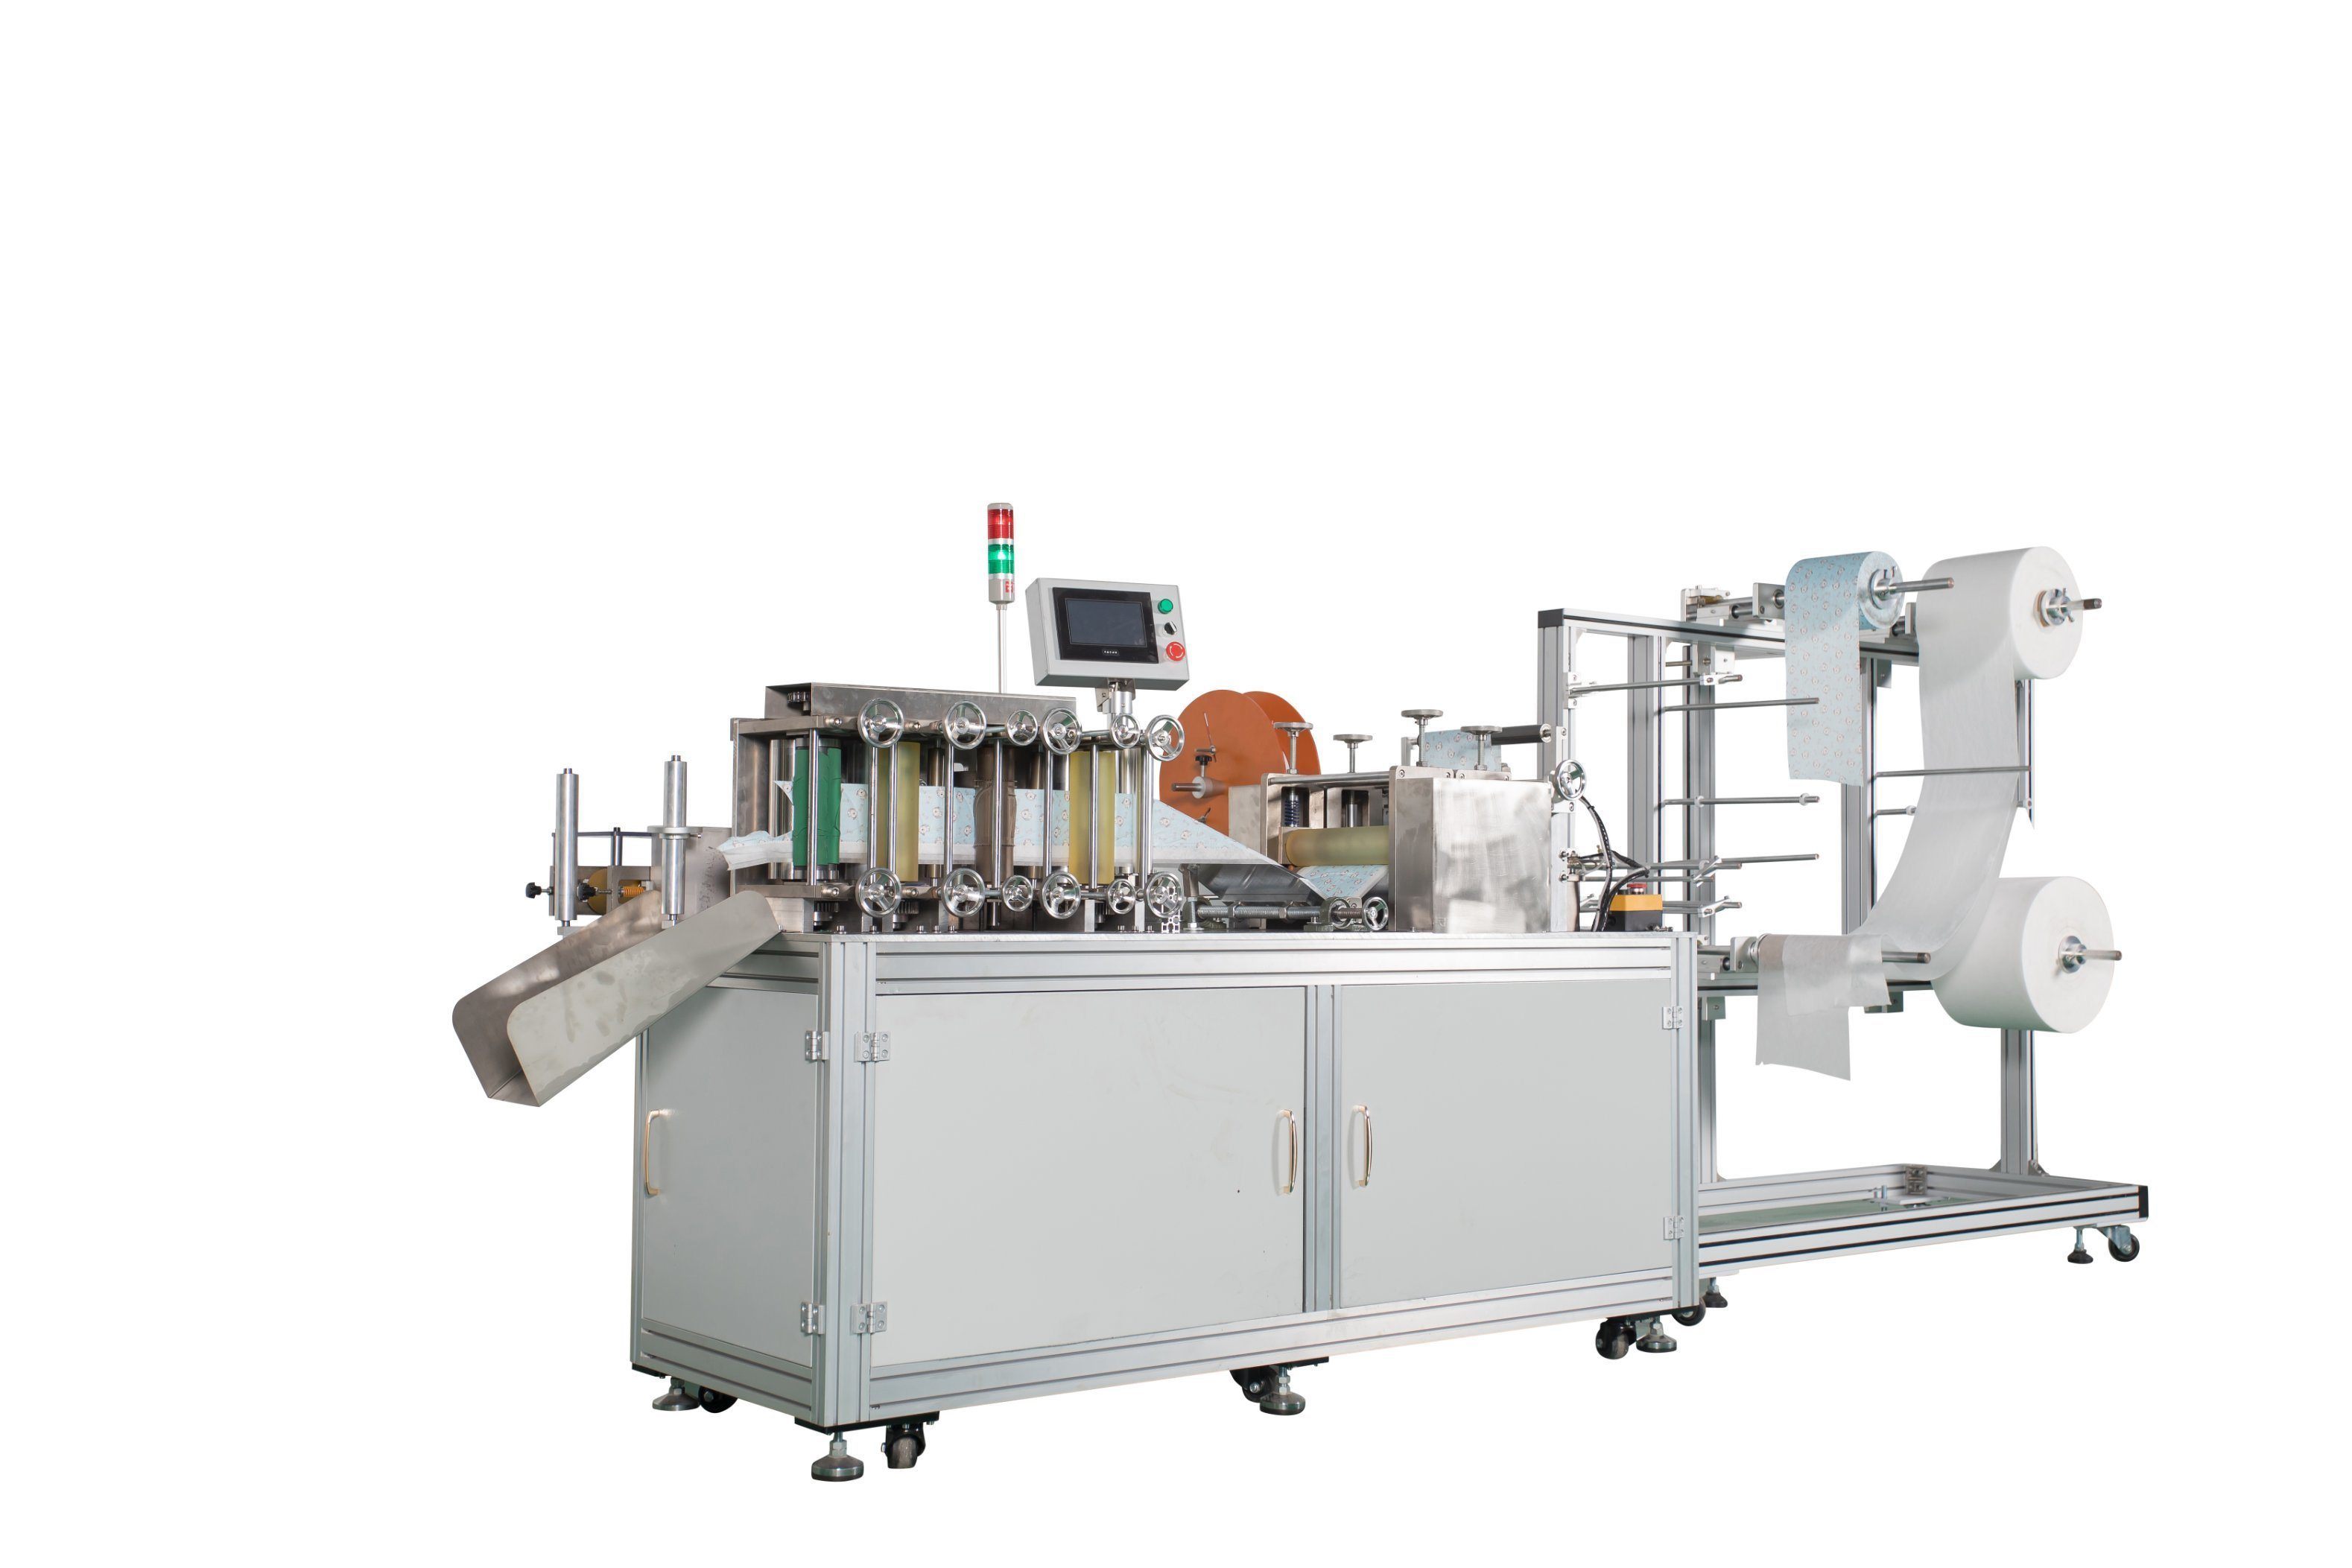 Ring Frame Textile Machinery Disposable Ear Loop Textile Machinery Spare Parts Machine